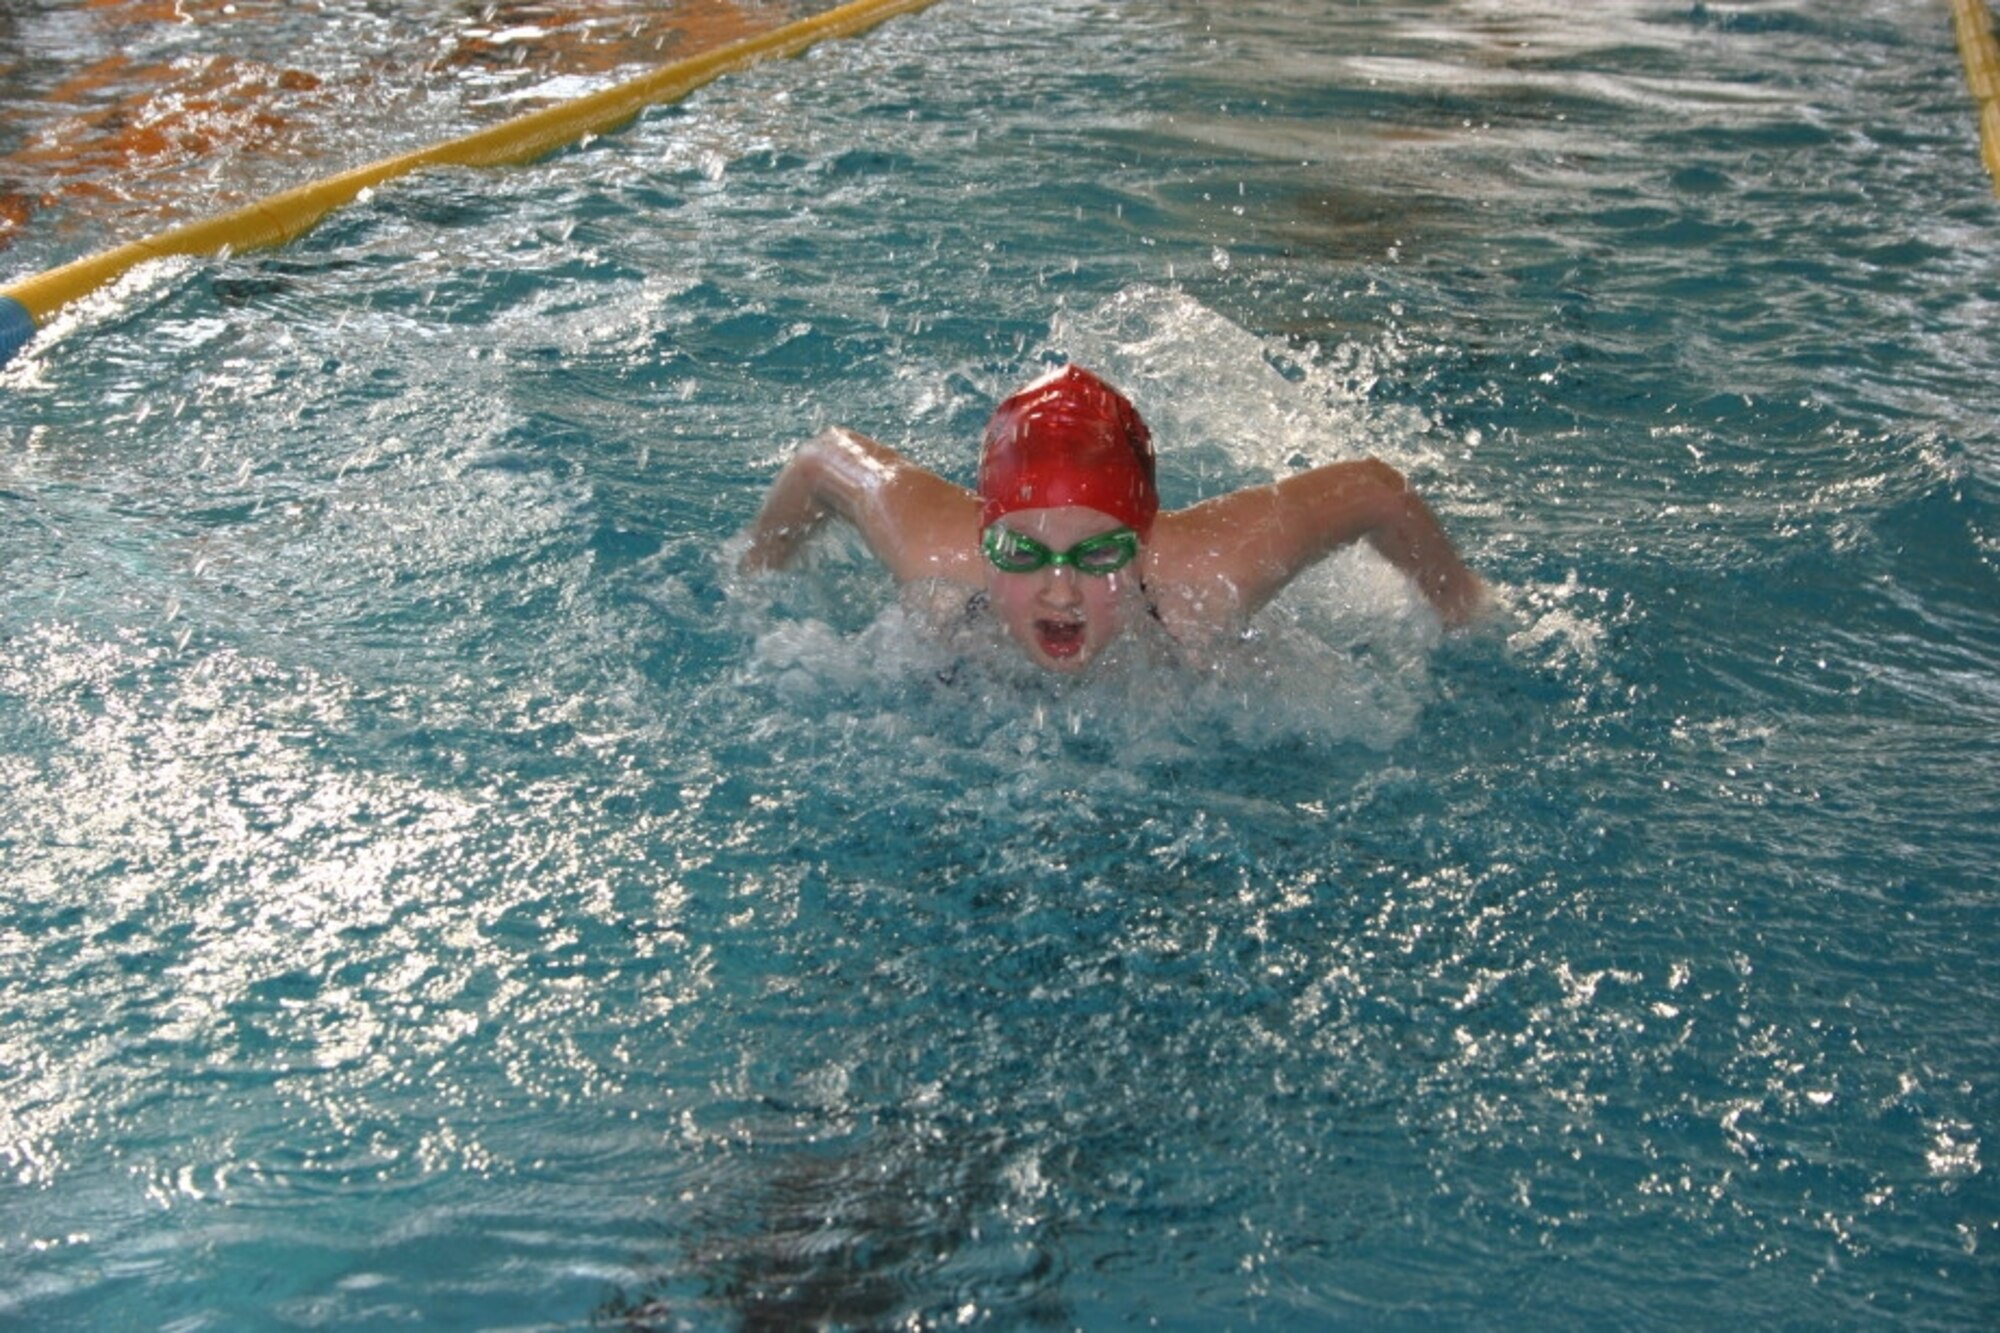 Haley McWilliams, 11years old, daughter of Maj. Tim and Tracy McWilliams, swims the butterfly during her leg of the 4x50 meter medley relay.  The relay team placed third at the European Forces Swim League championships in Munich. (Photo courtesy of Virginia Silveria)